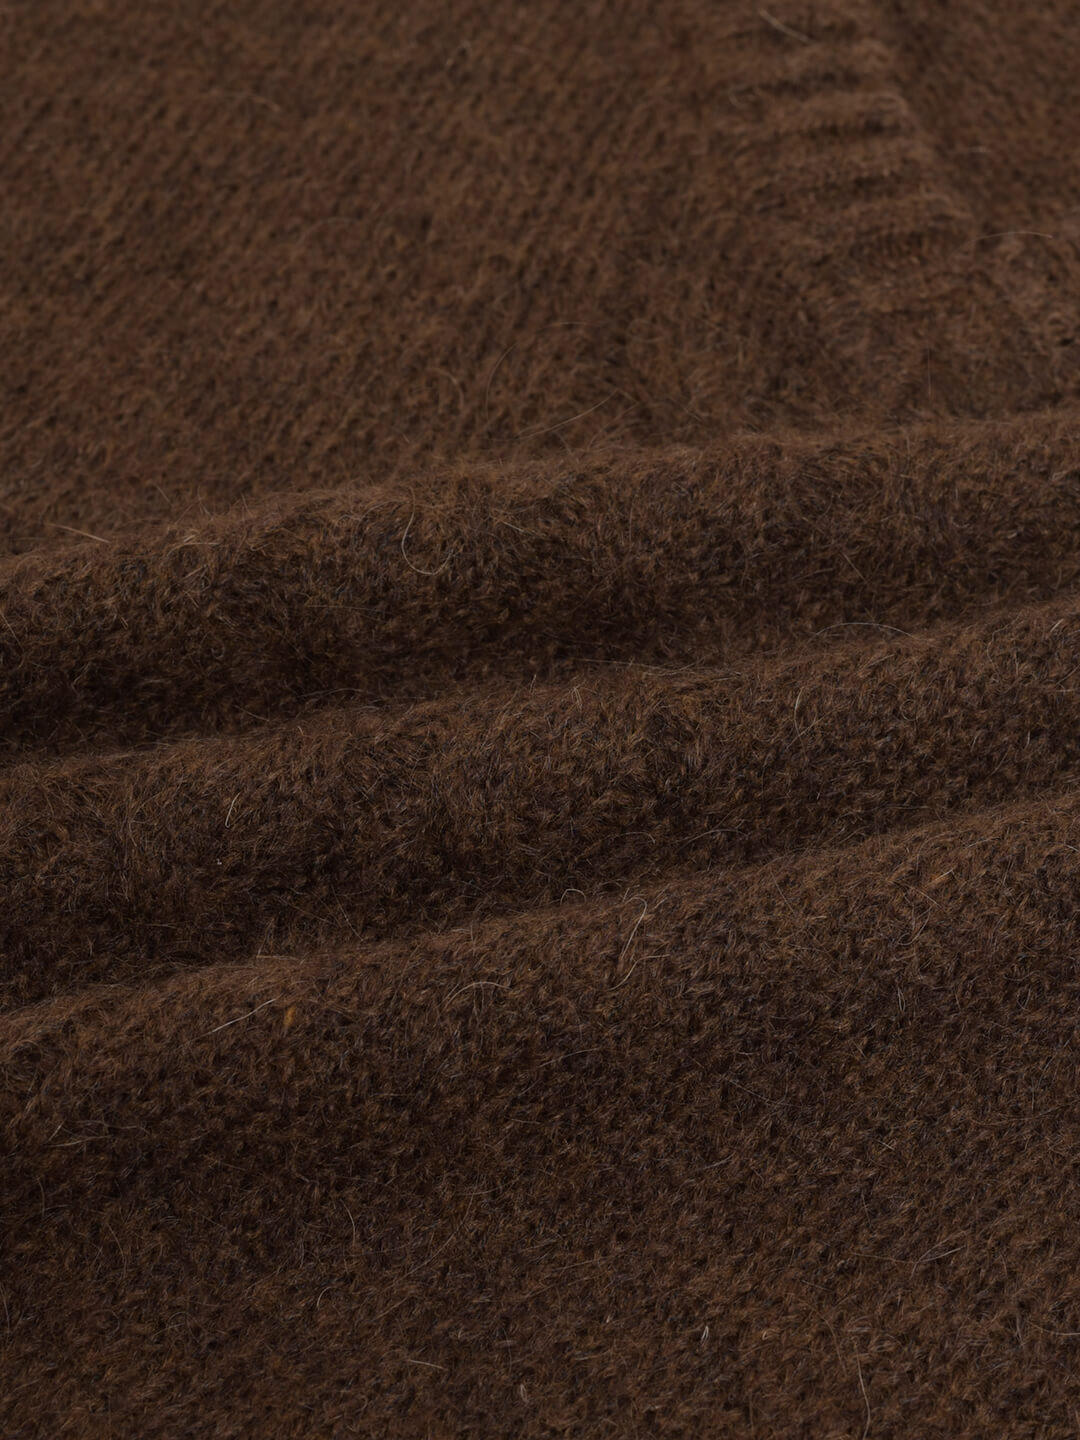 【Final Sale】Gail Cable Brown Knitted Vest – Simple Retro